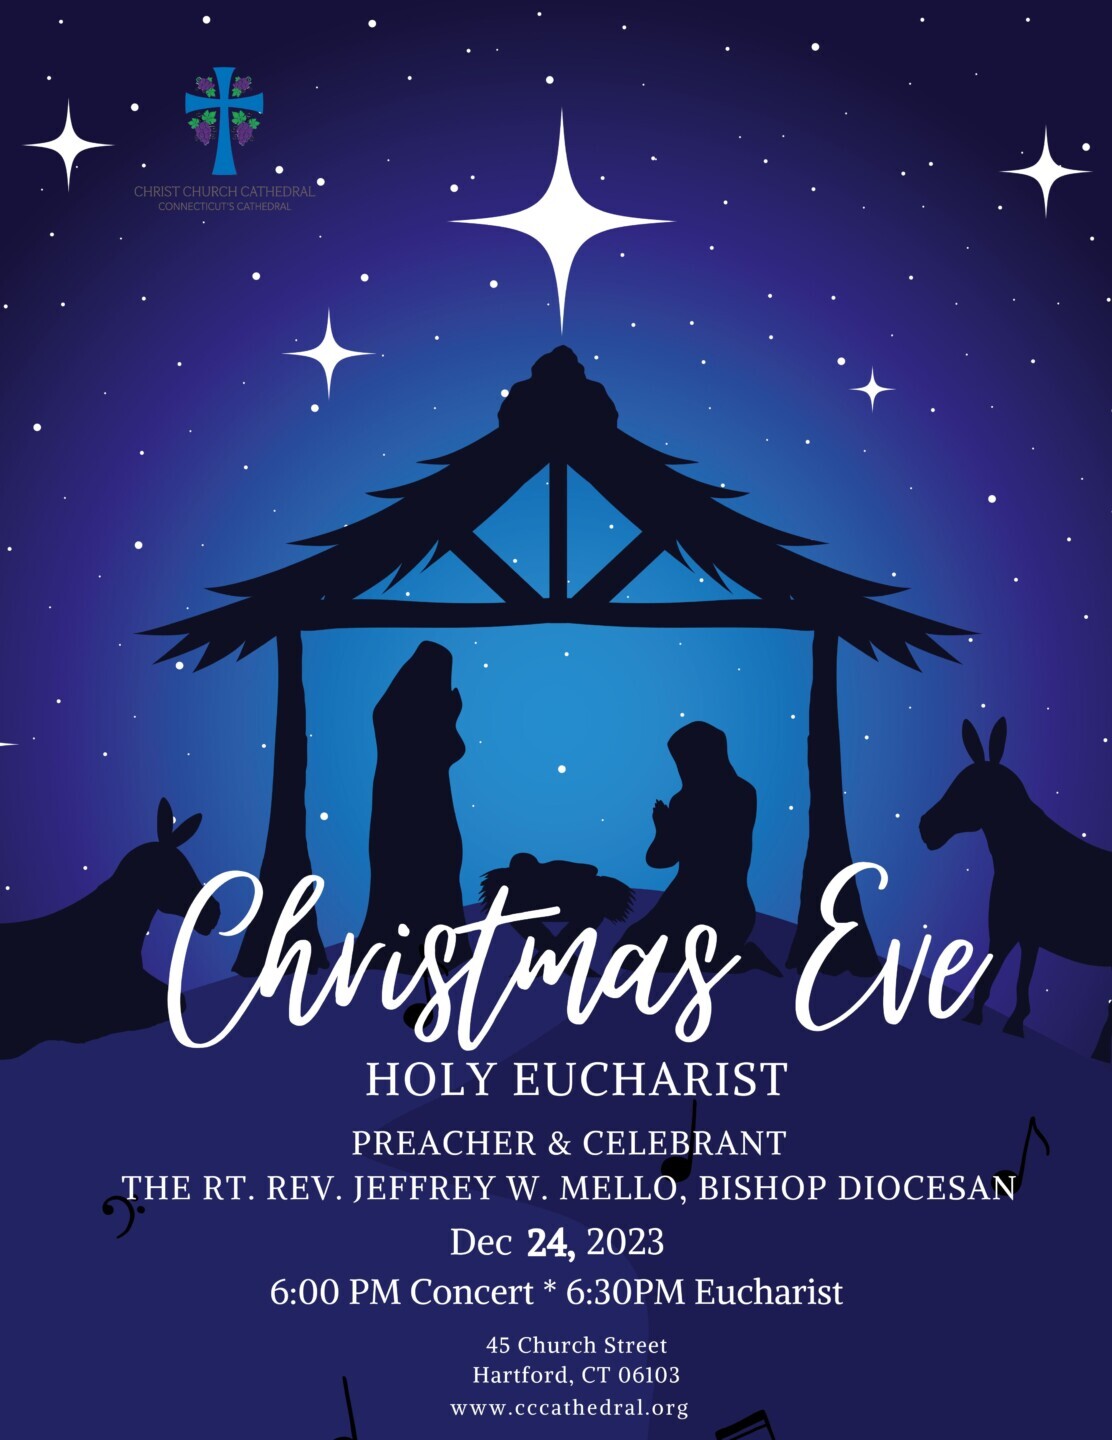 Christmas Eve concert and Eucharist